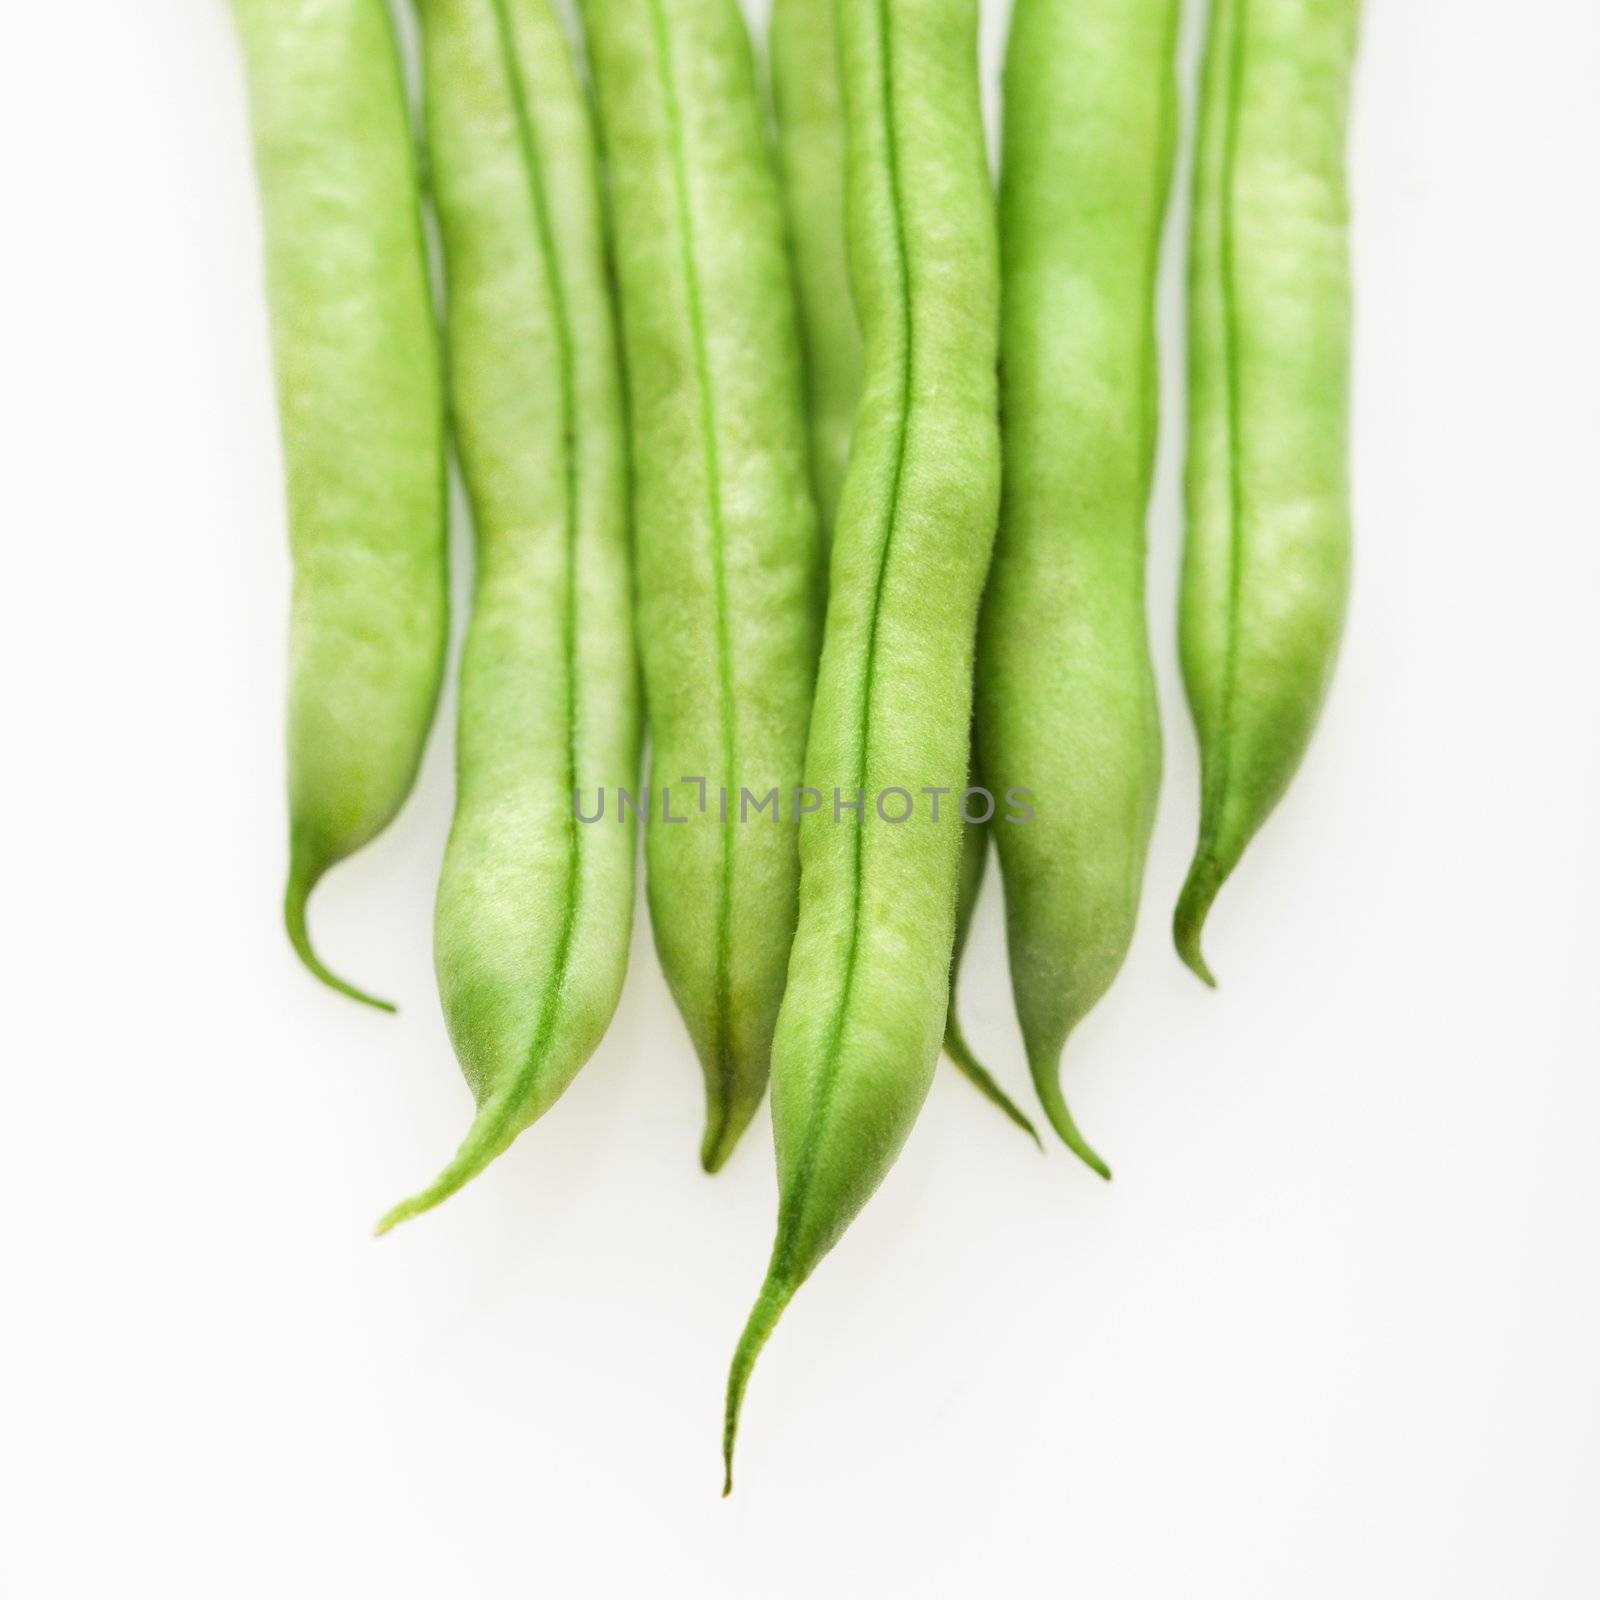 Green beans. by iofoto